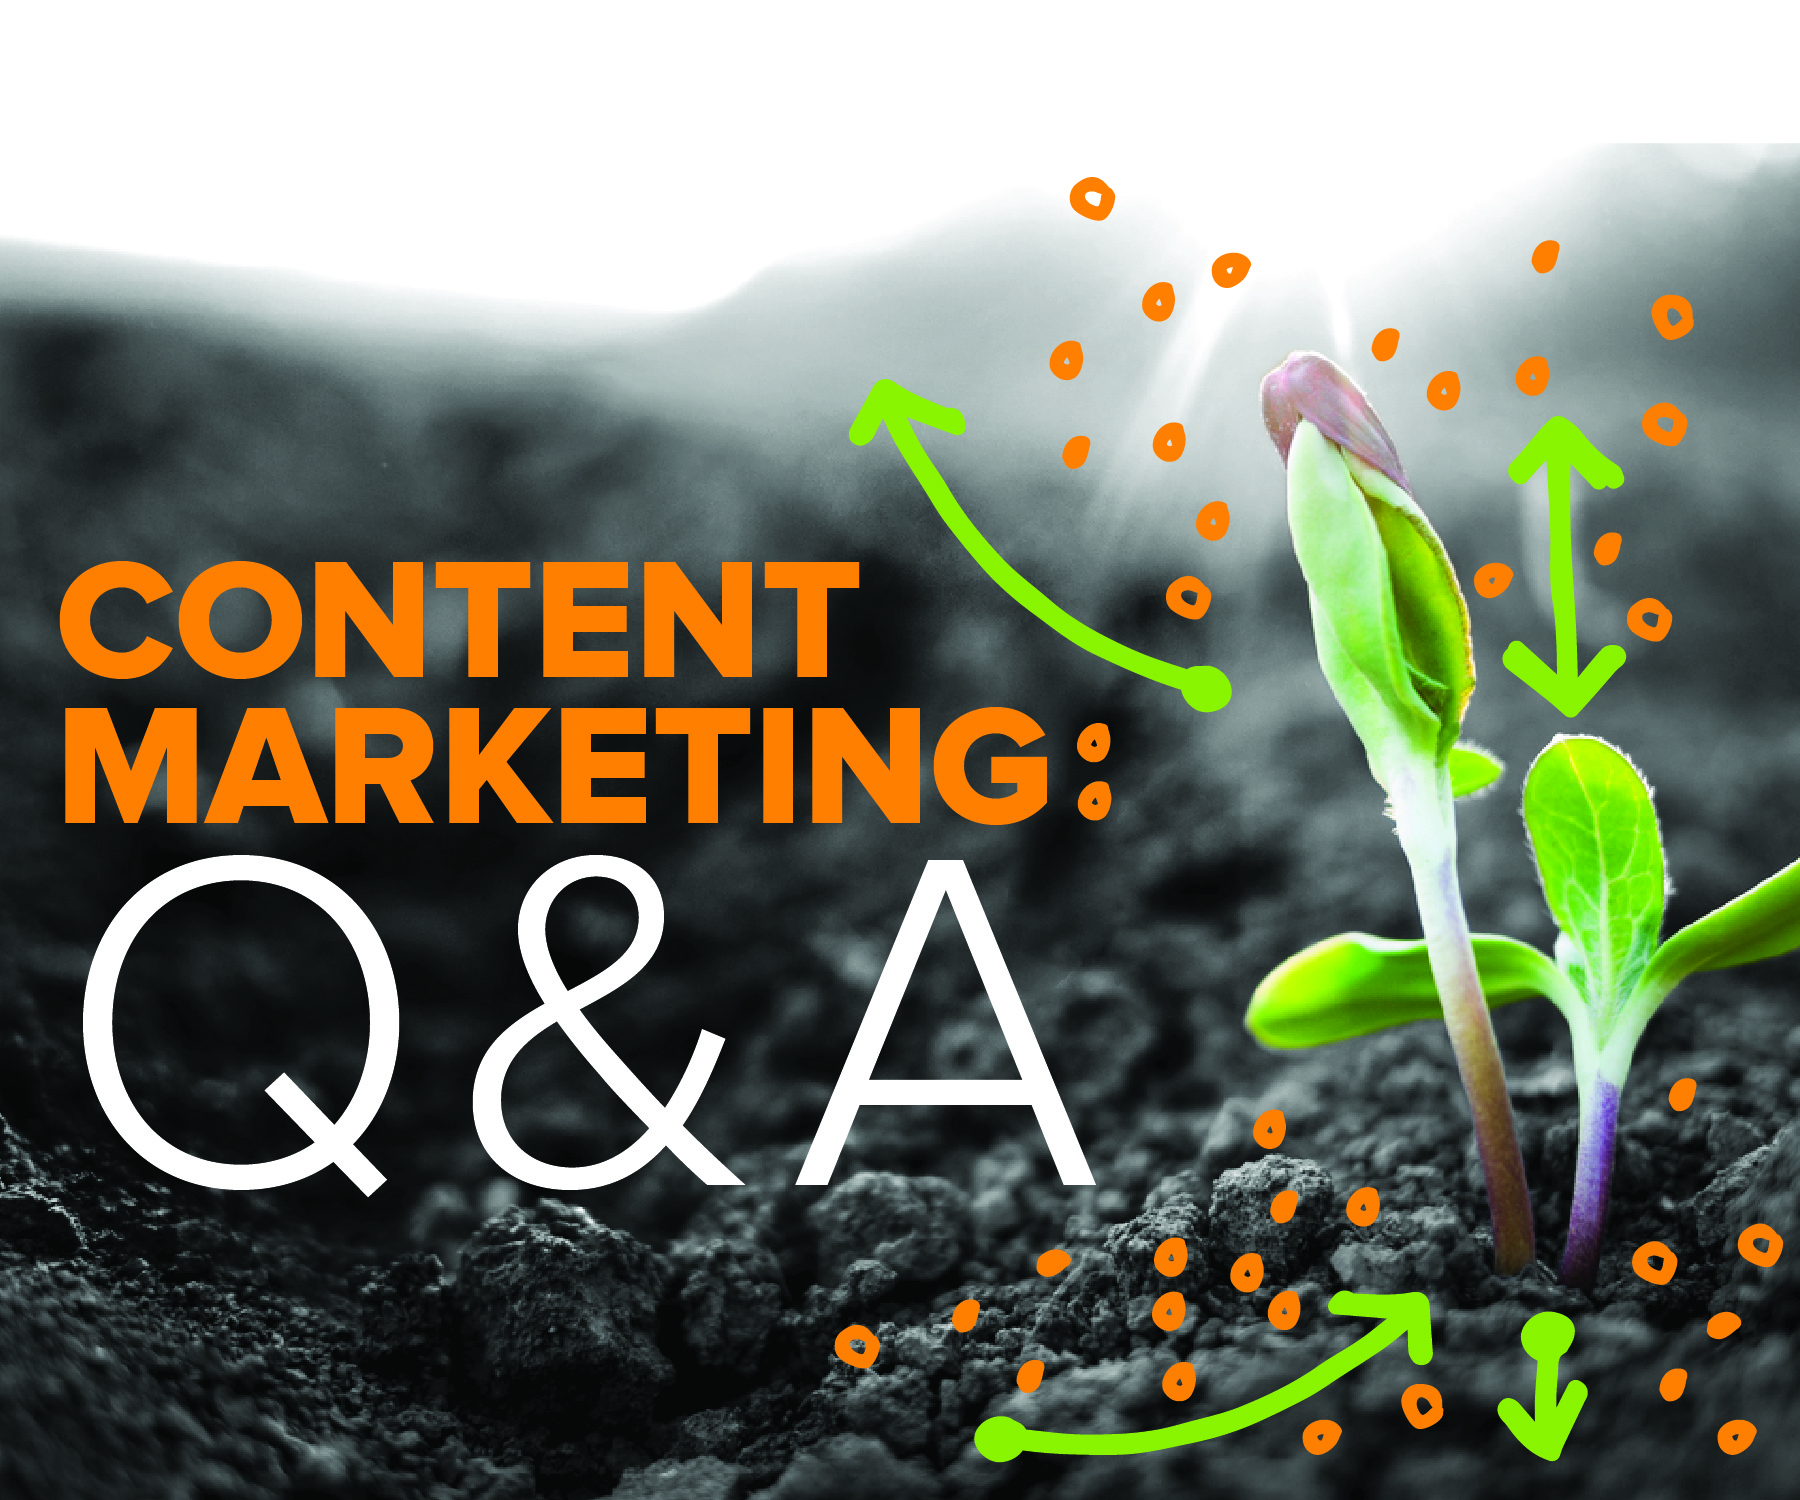 In preparation of our content marketing Q&A, hosts Katherine Griwert and Francis Ma give us exclusive insights.